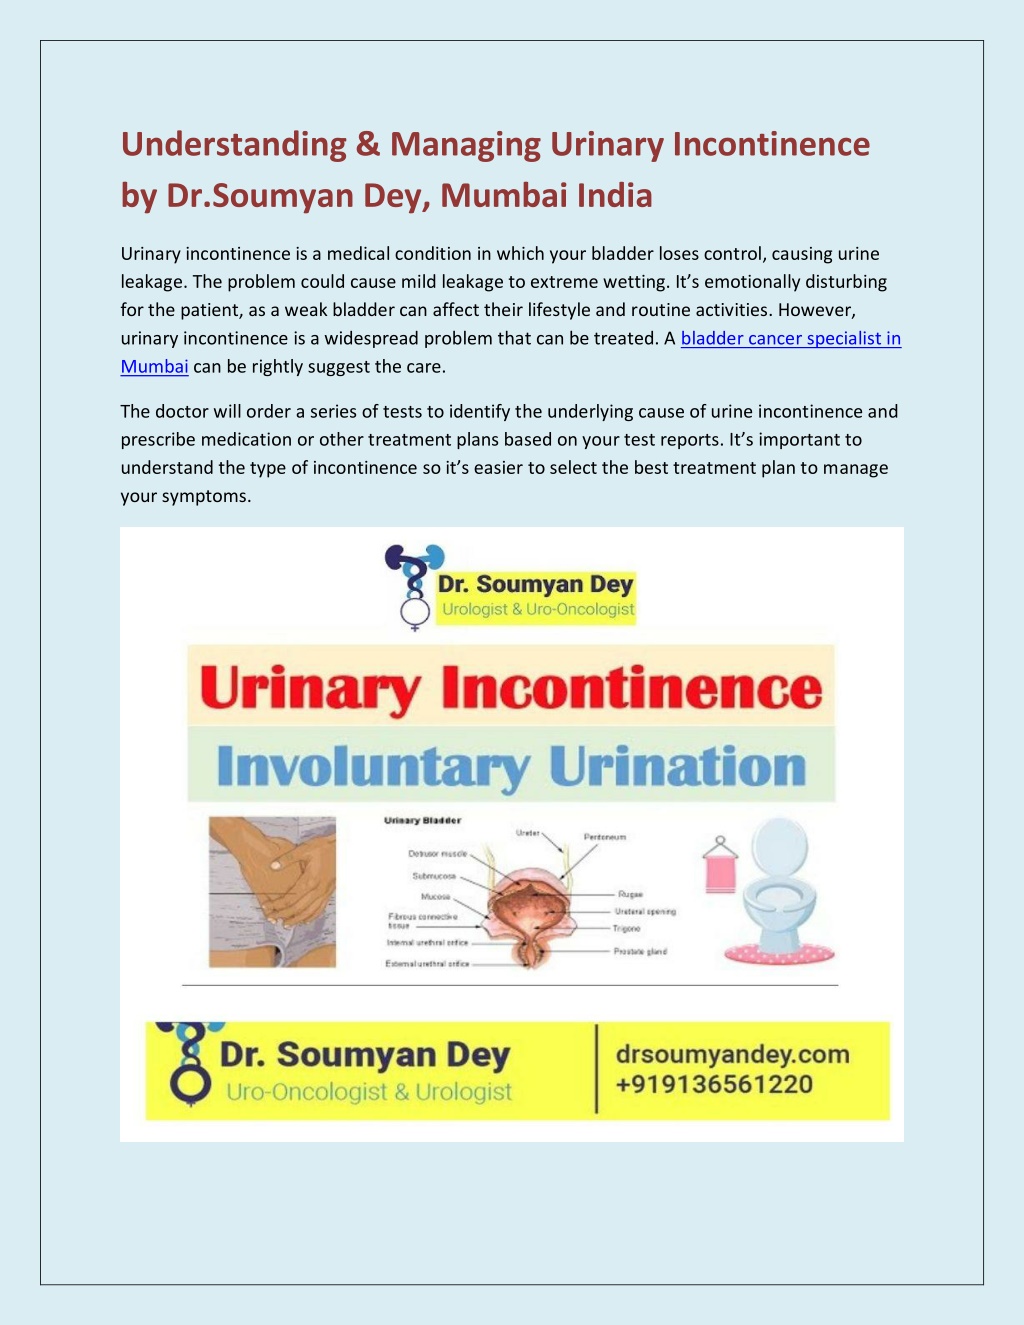 Ppt Know More About Understanding And Managing Urinary Incontinence By Drsoumyan Dey Powerpoint 